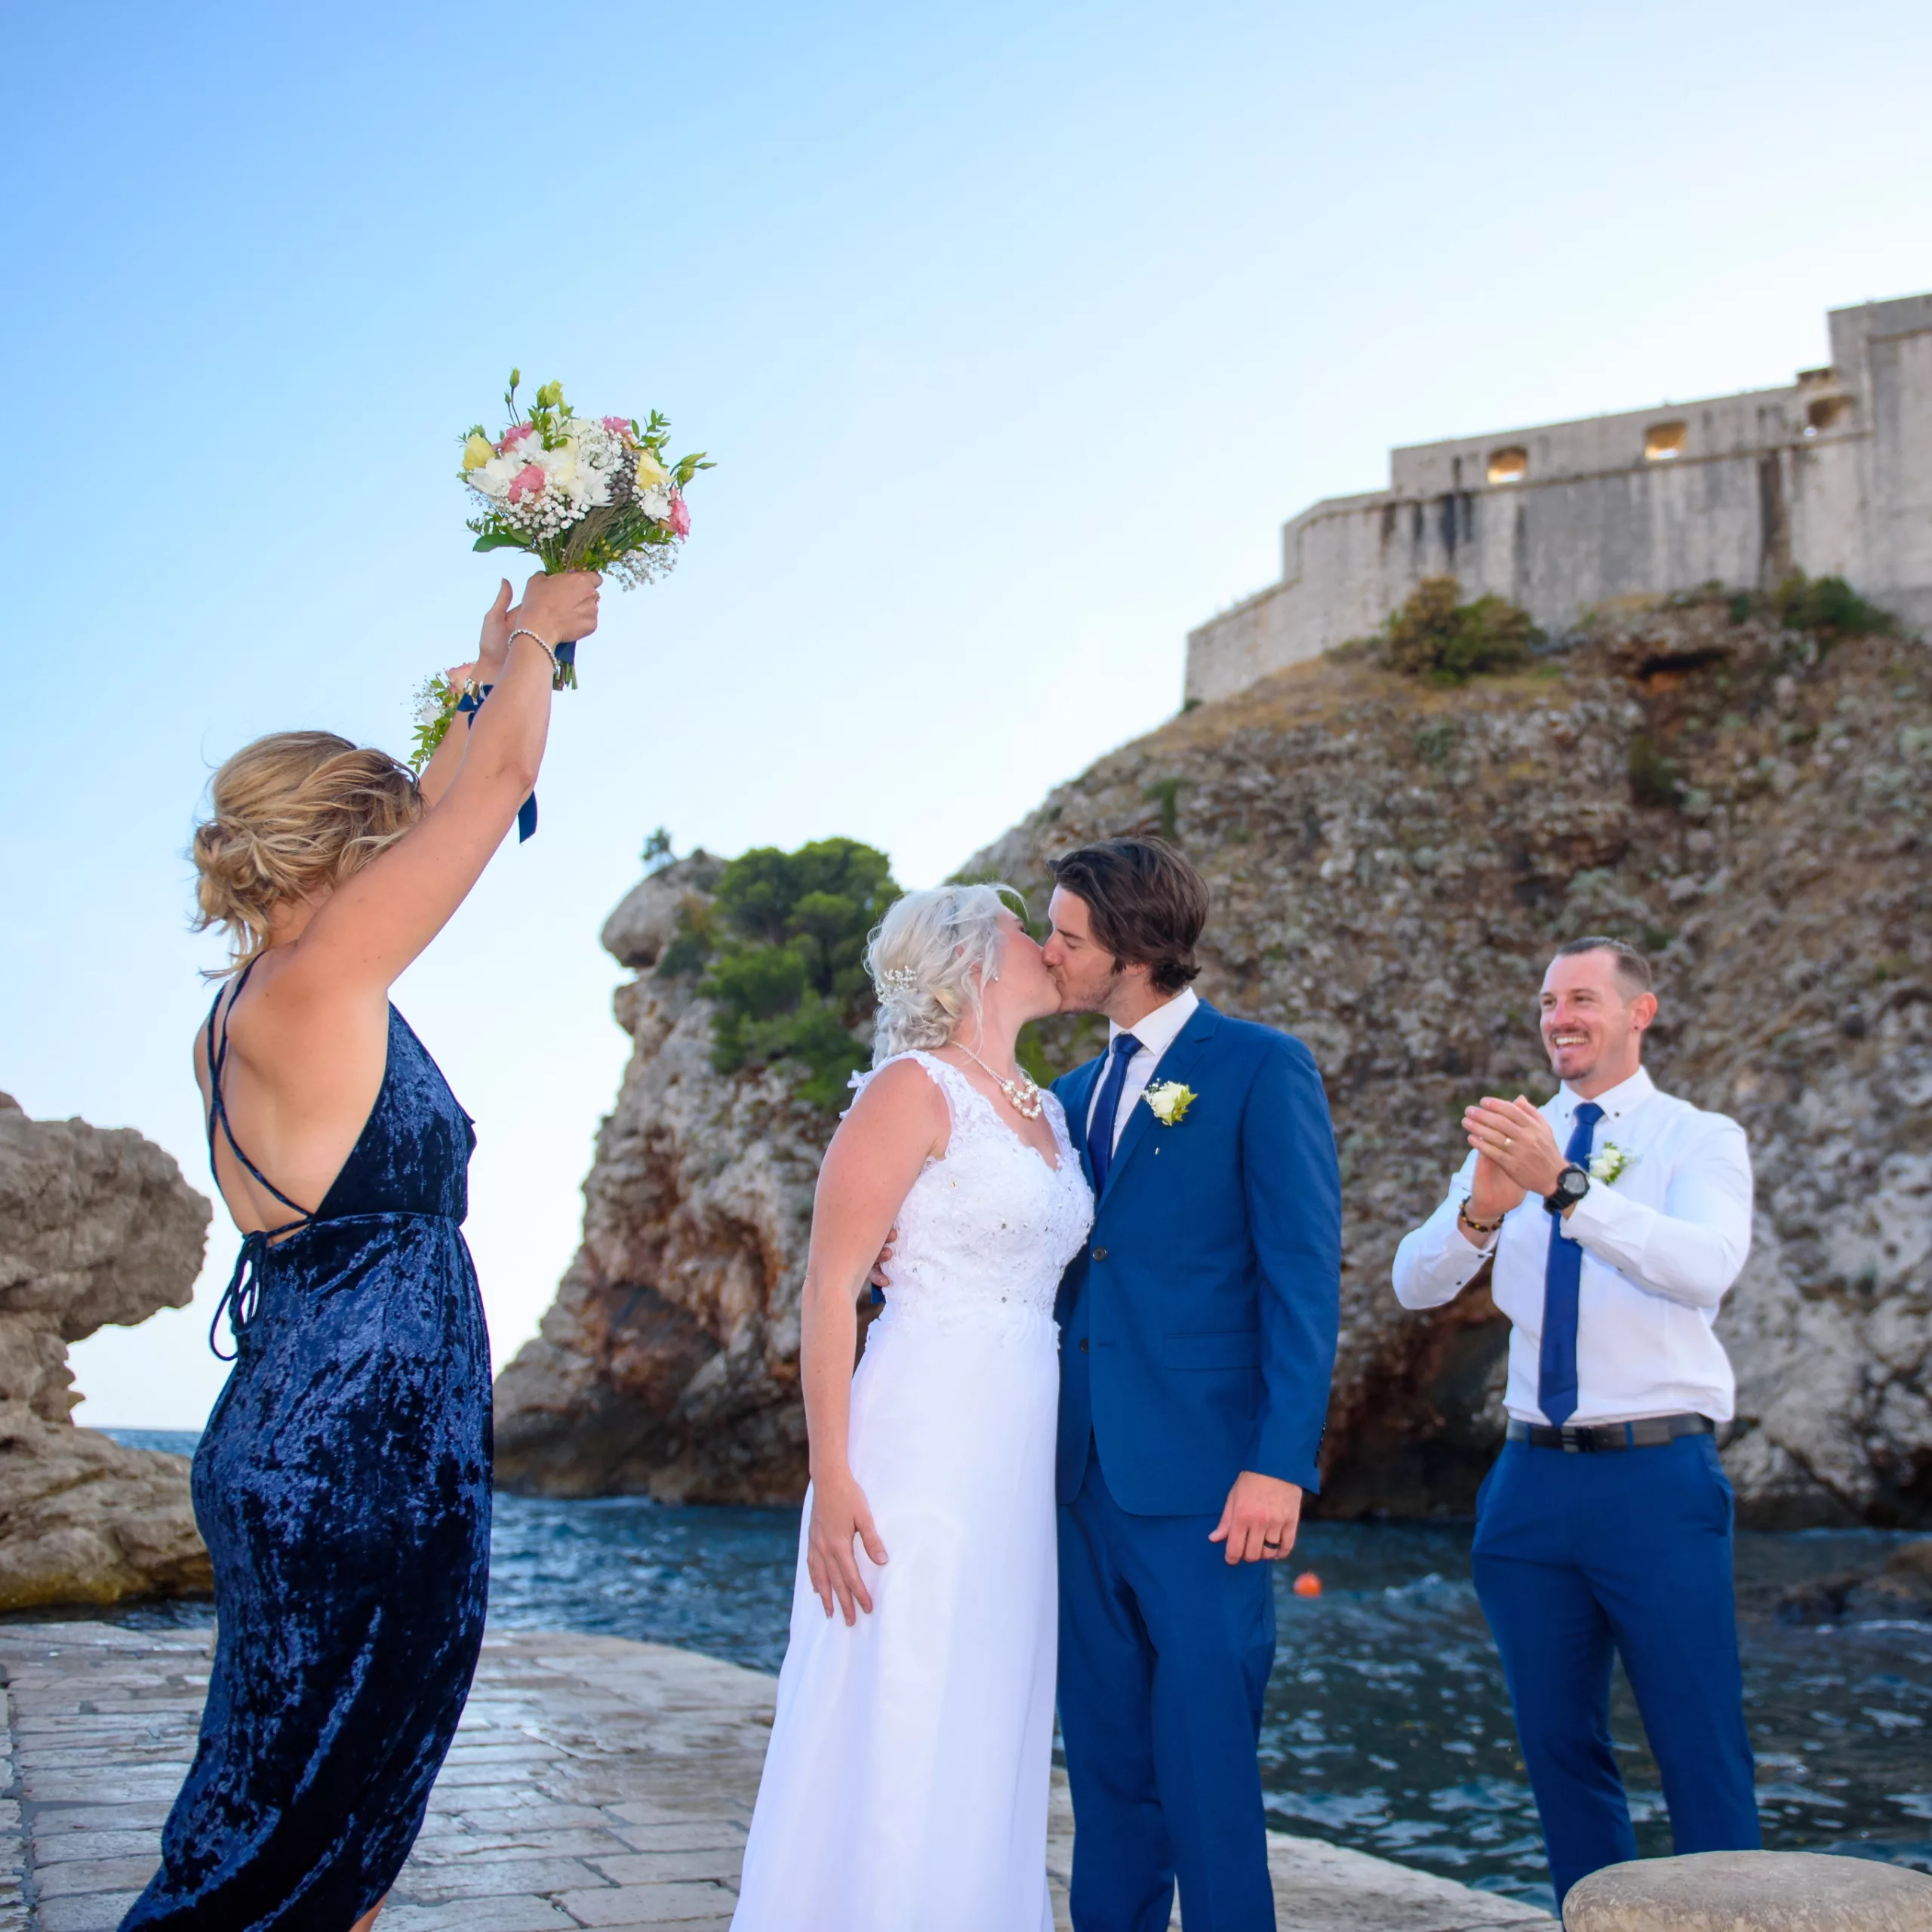 Guide for a destination wedding in Europe - LoveGracefully